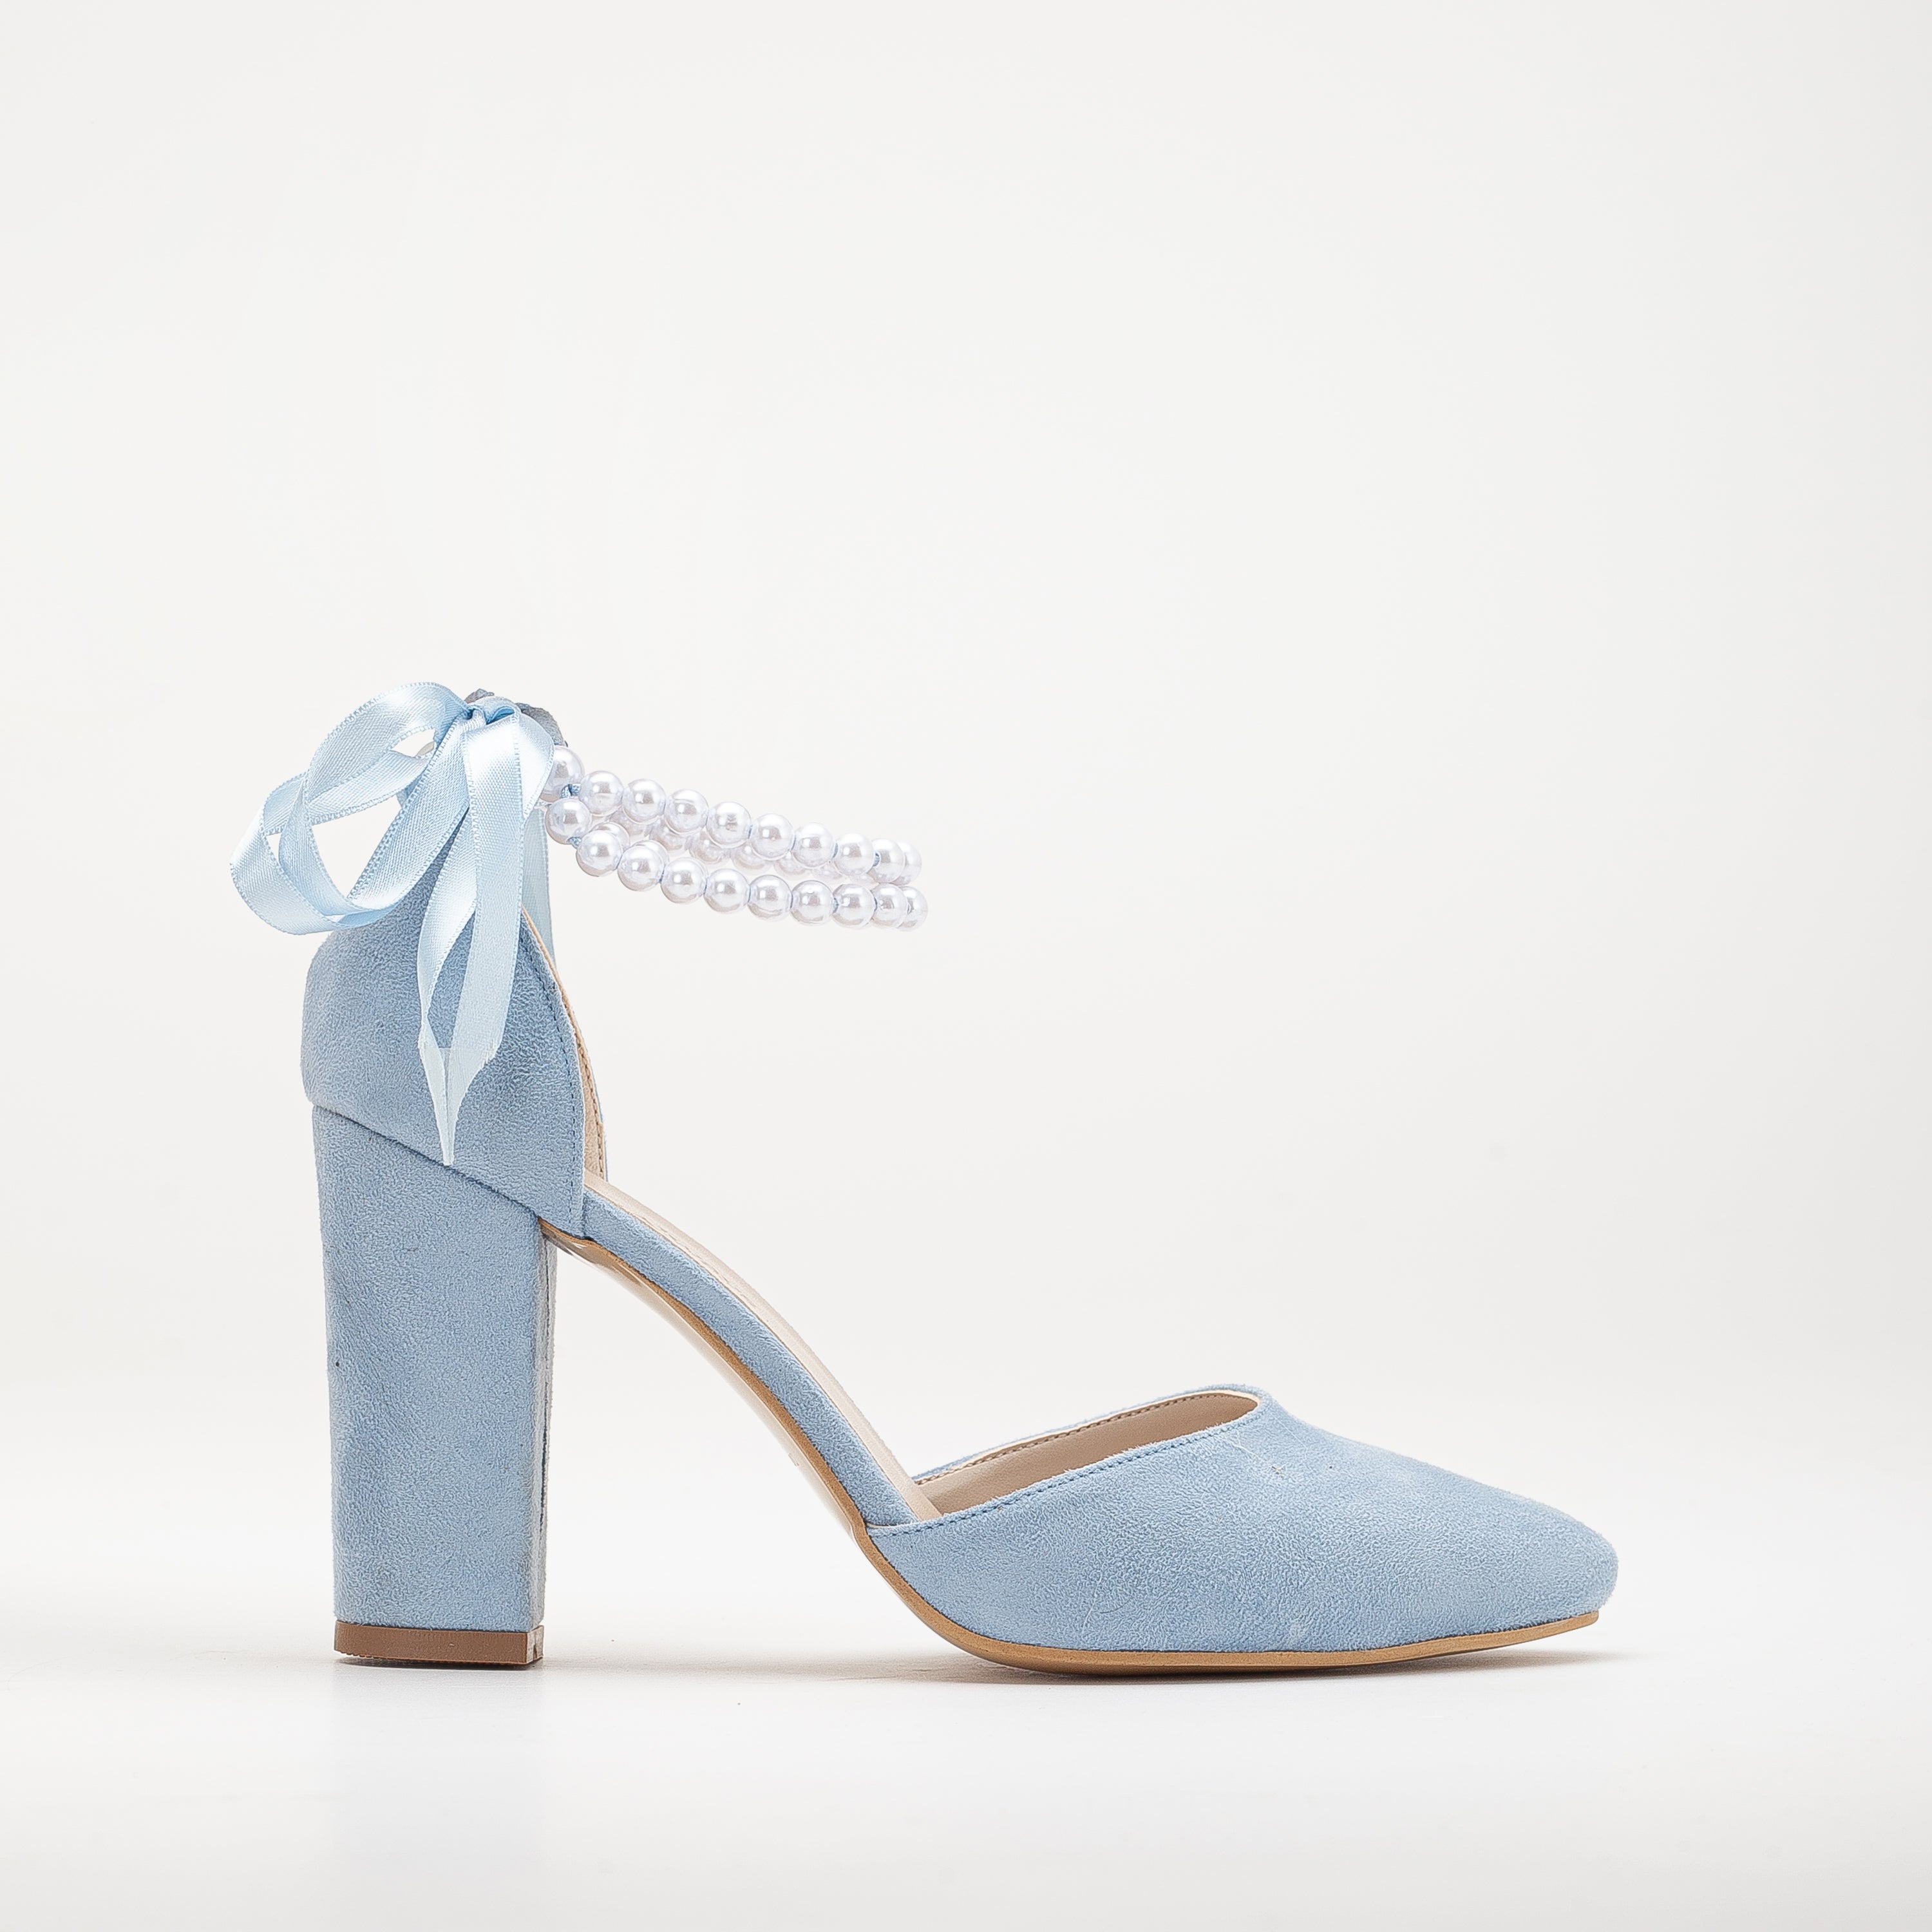 Baby blue closed-toe heels, Elegant sky blue pumps, Formal blue high heels, Classic closed-toe blue shoes, Chic baby blue footwear, Sophisticated bridal heels, Stylish closed-toe blue heels, Trendy baby blue pumps, Fashionable high heels in baby blue, Versatile closed-toe blue footwear